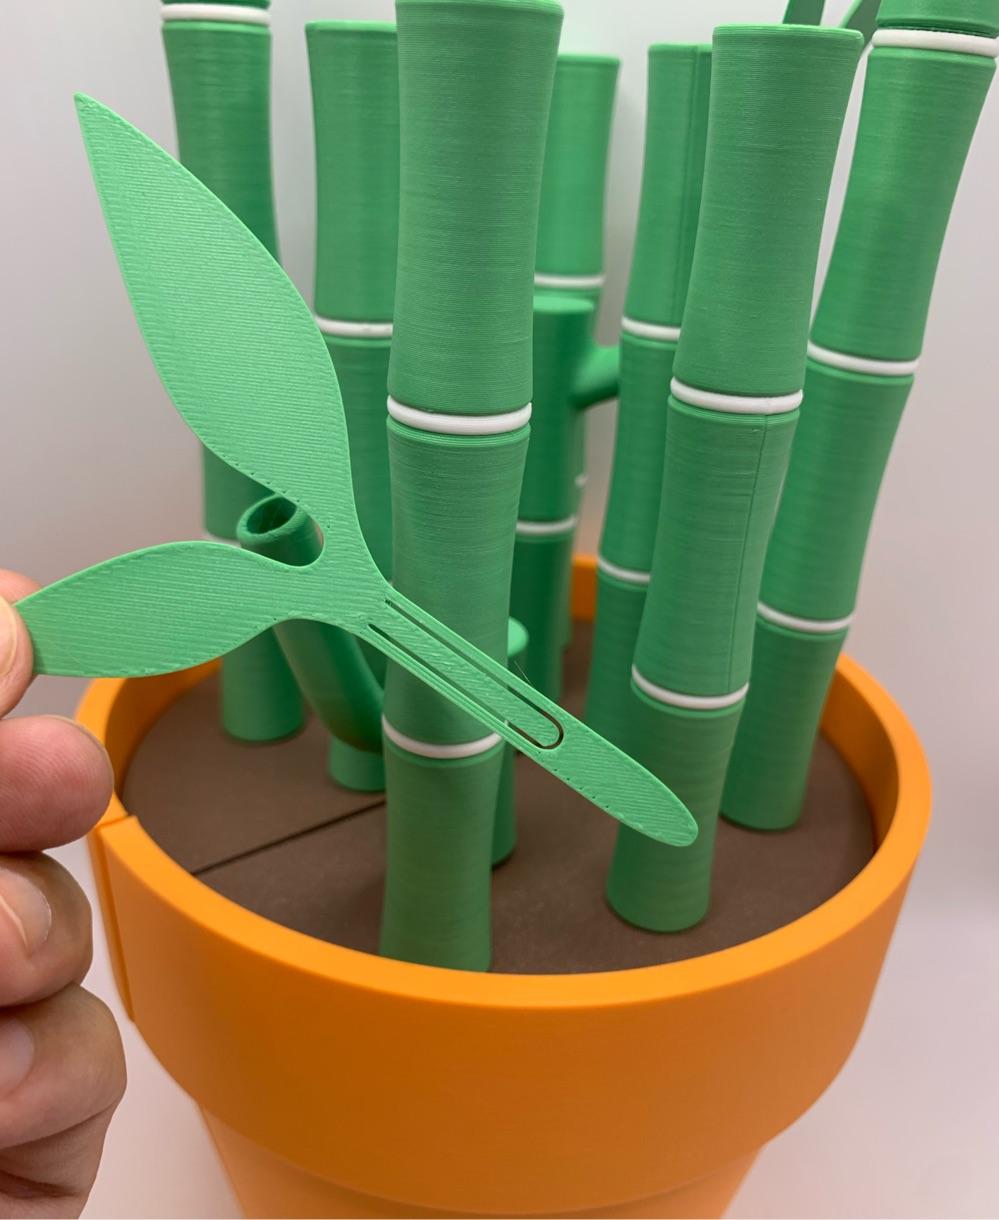 Bambookends - Bamboo Functional Plant with Pens, Highlighters, Post it note dispenser, and Bookmarks 3d model